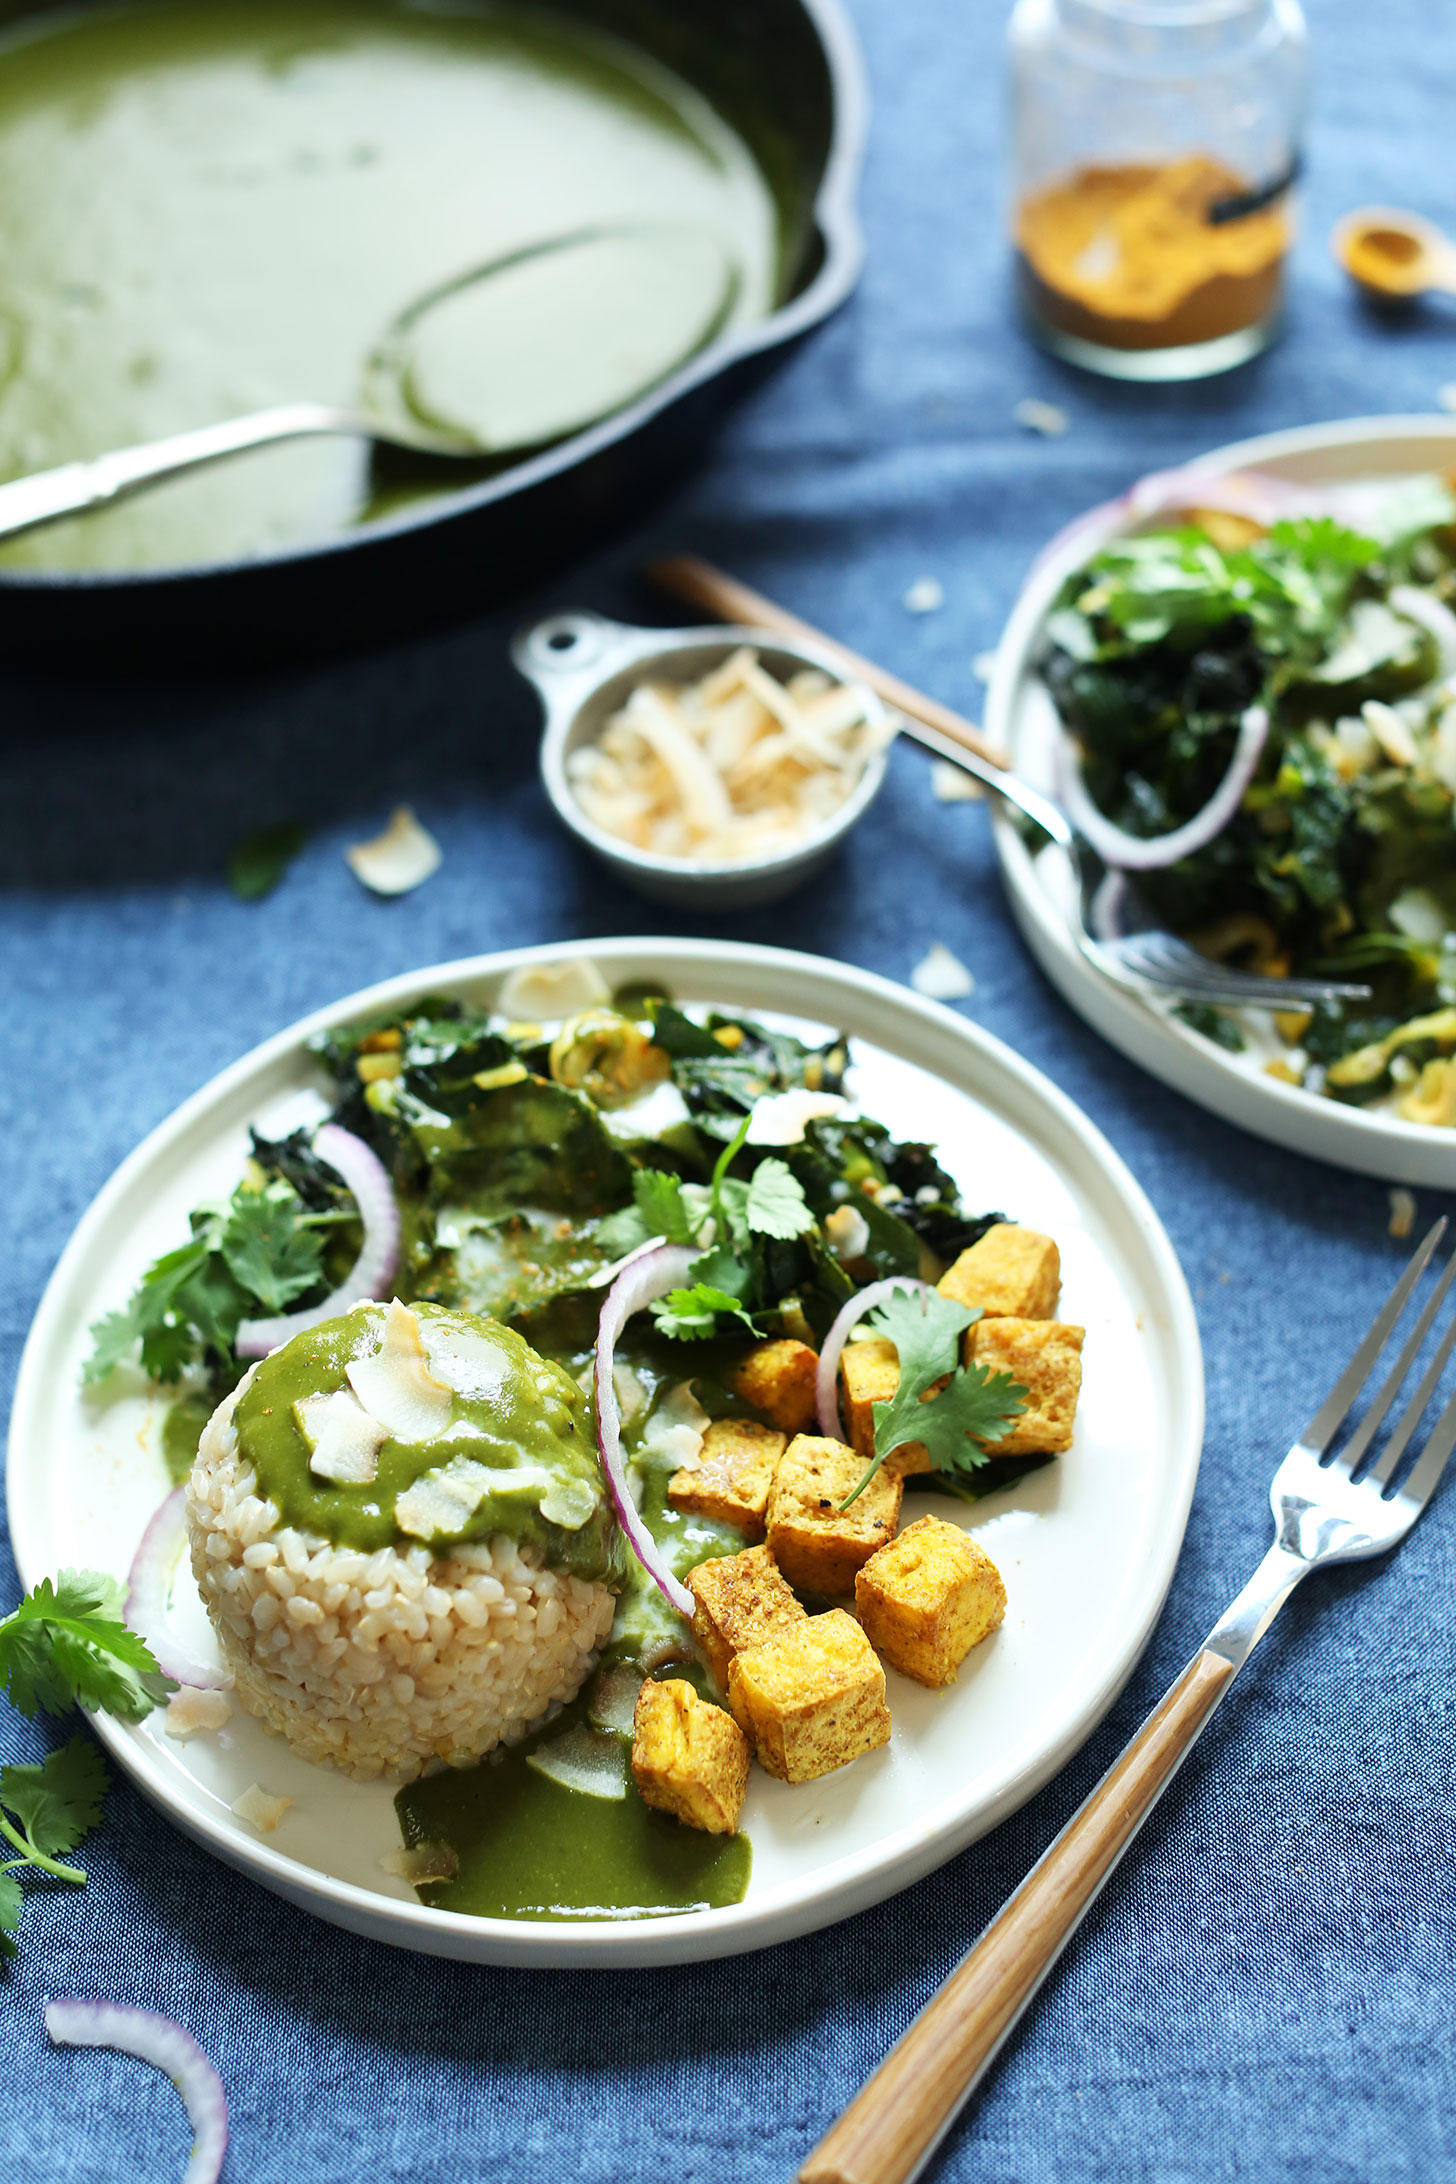 Hearty plant-based meal of rice, tofu, greens, and green curry on a plate